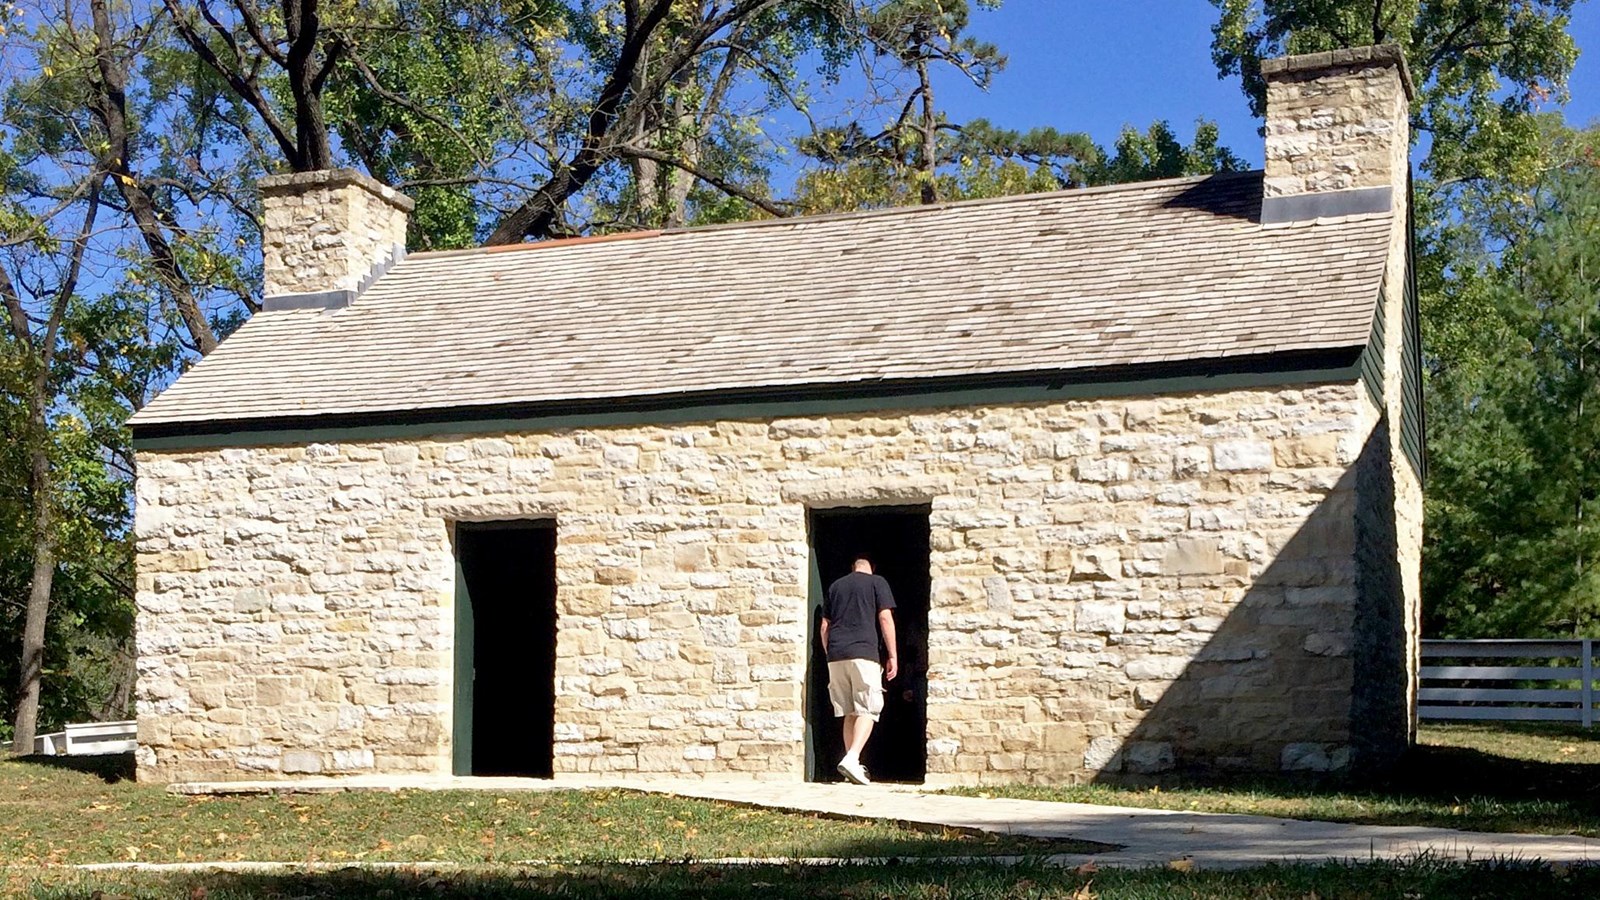 stone building with a chimney on each end. Two doors on long side. Man entering door on right.